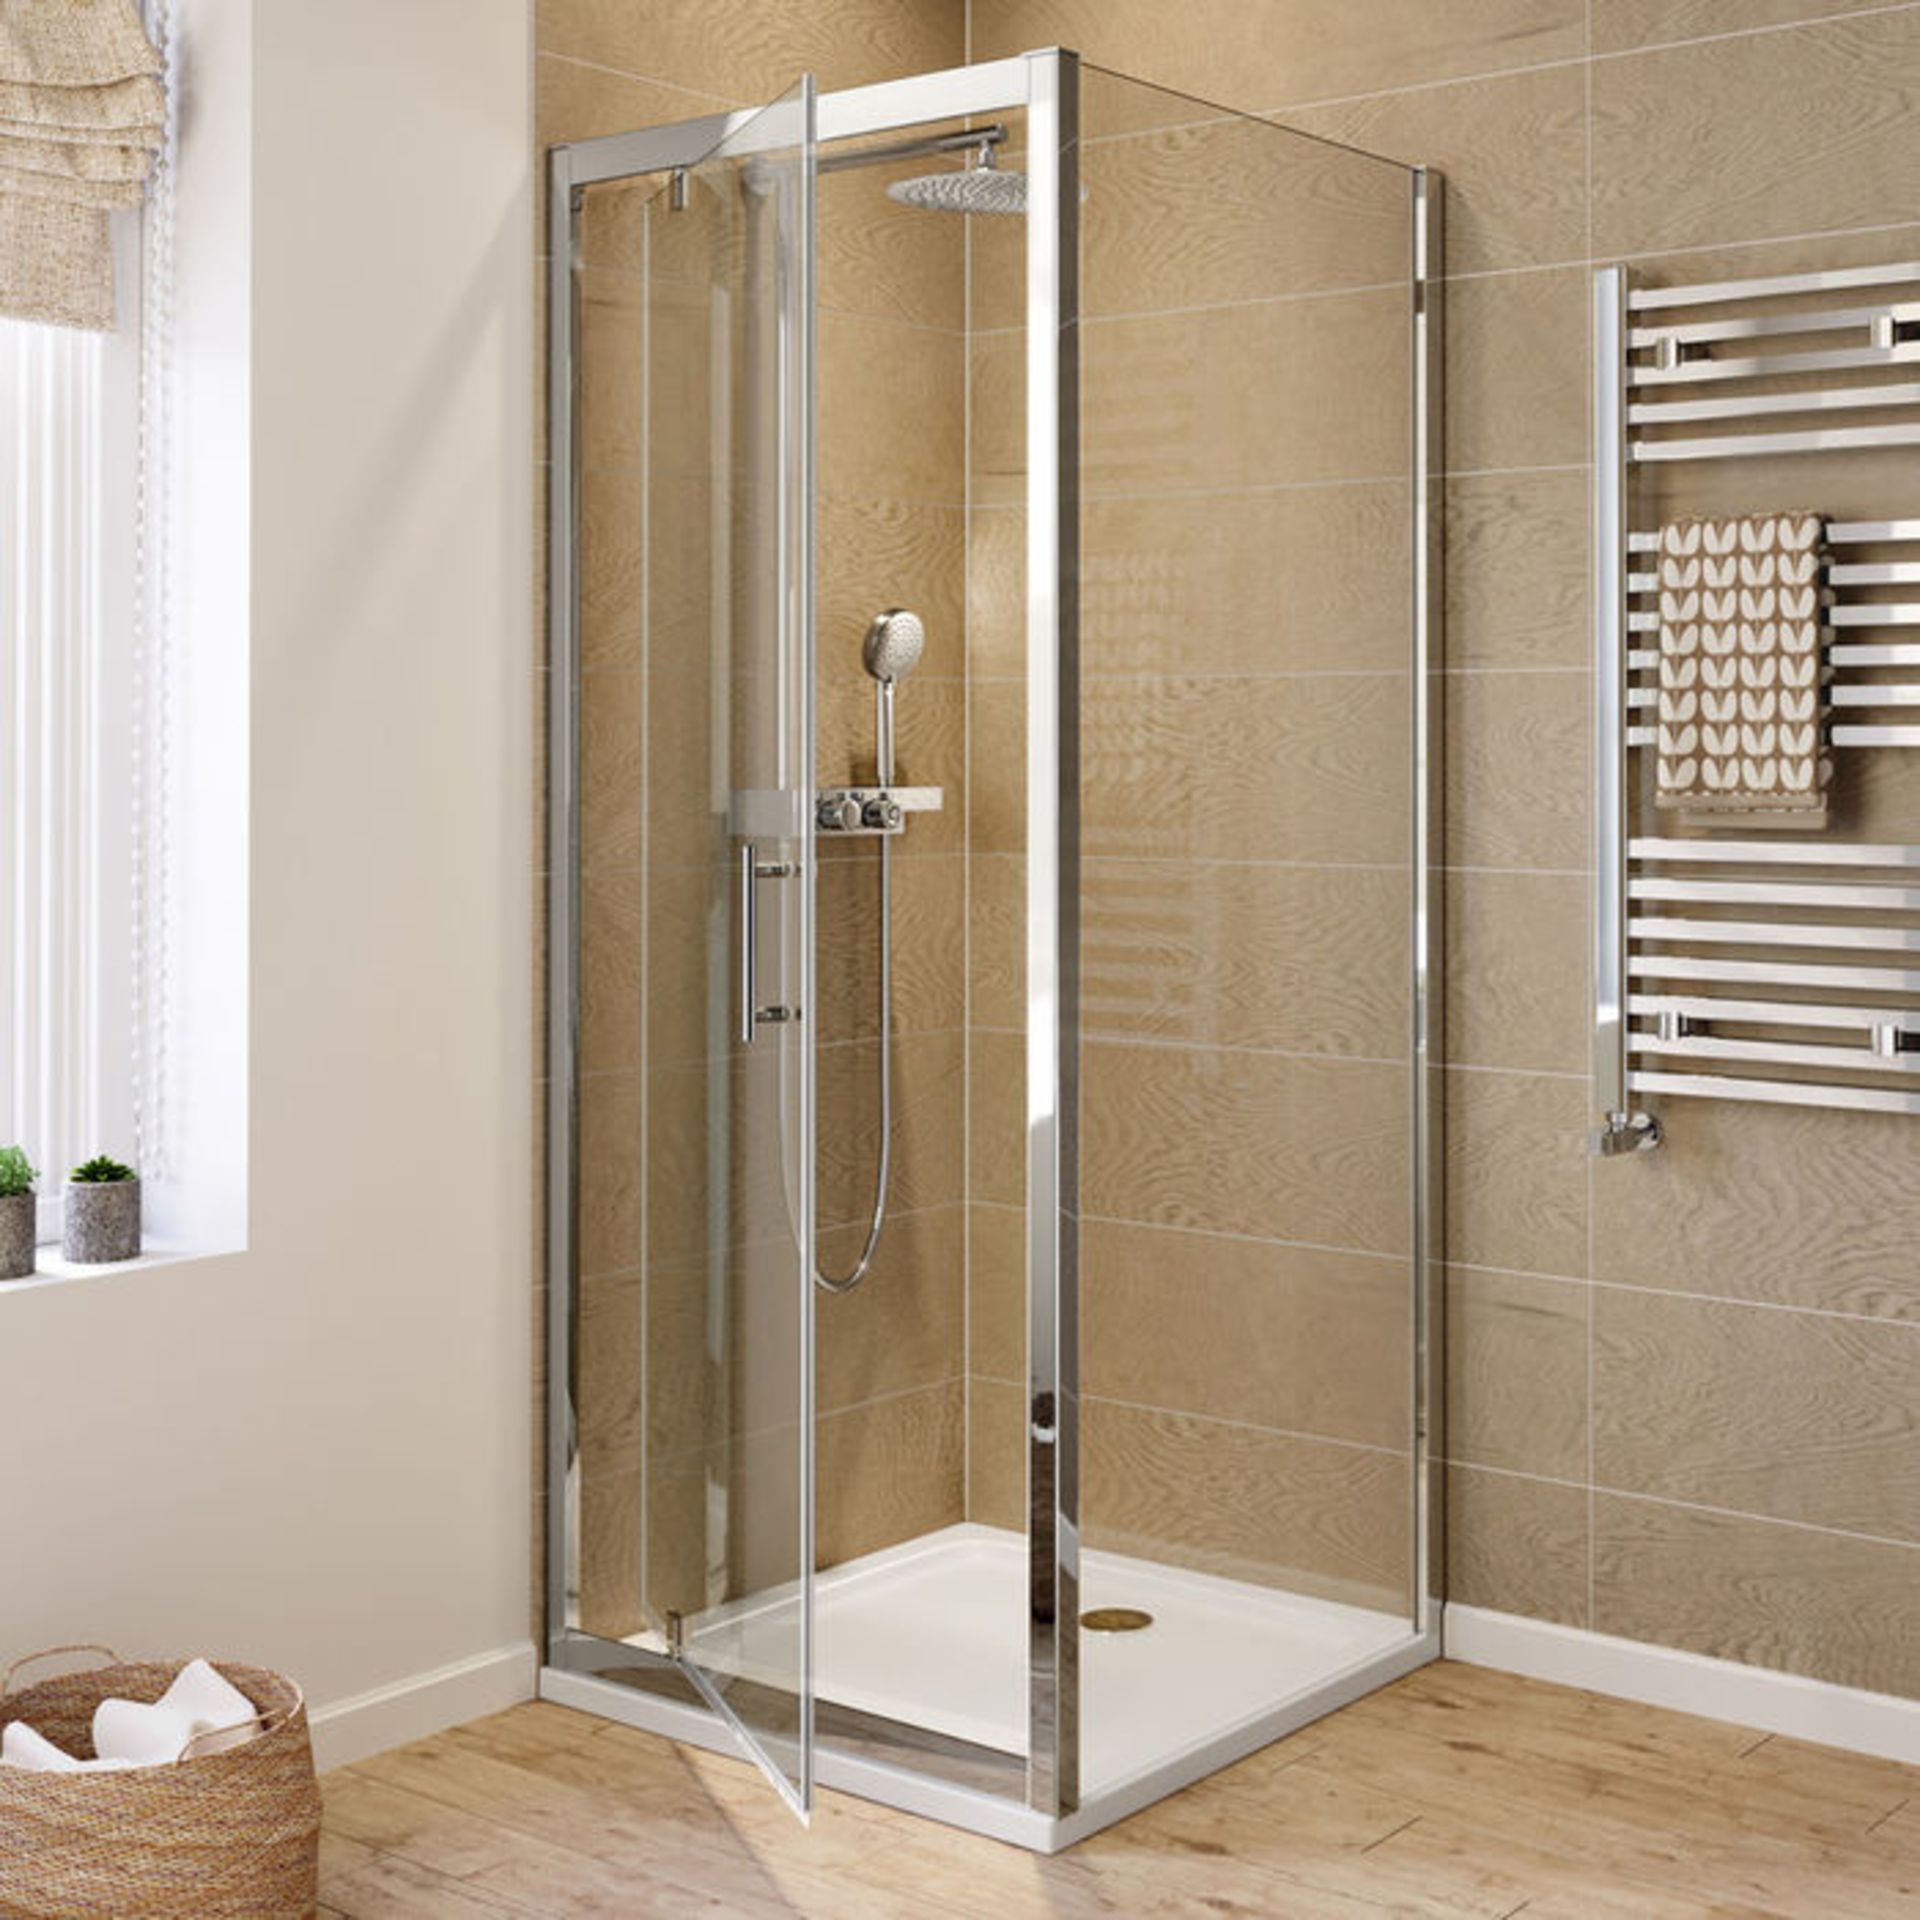 (DK46) 900x760mm - 6mm - Elements Pivot Door Shower Enclosure. RRP £307.99. 6mm Safety Glass Fully - Image 2 of 4